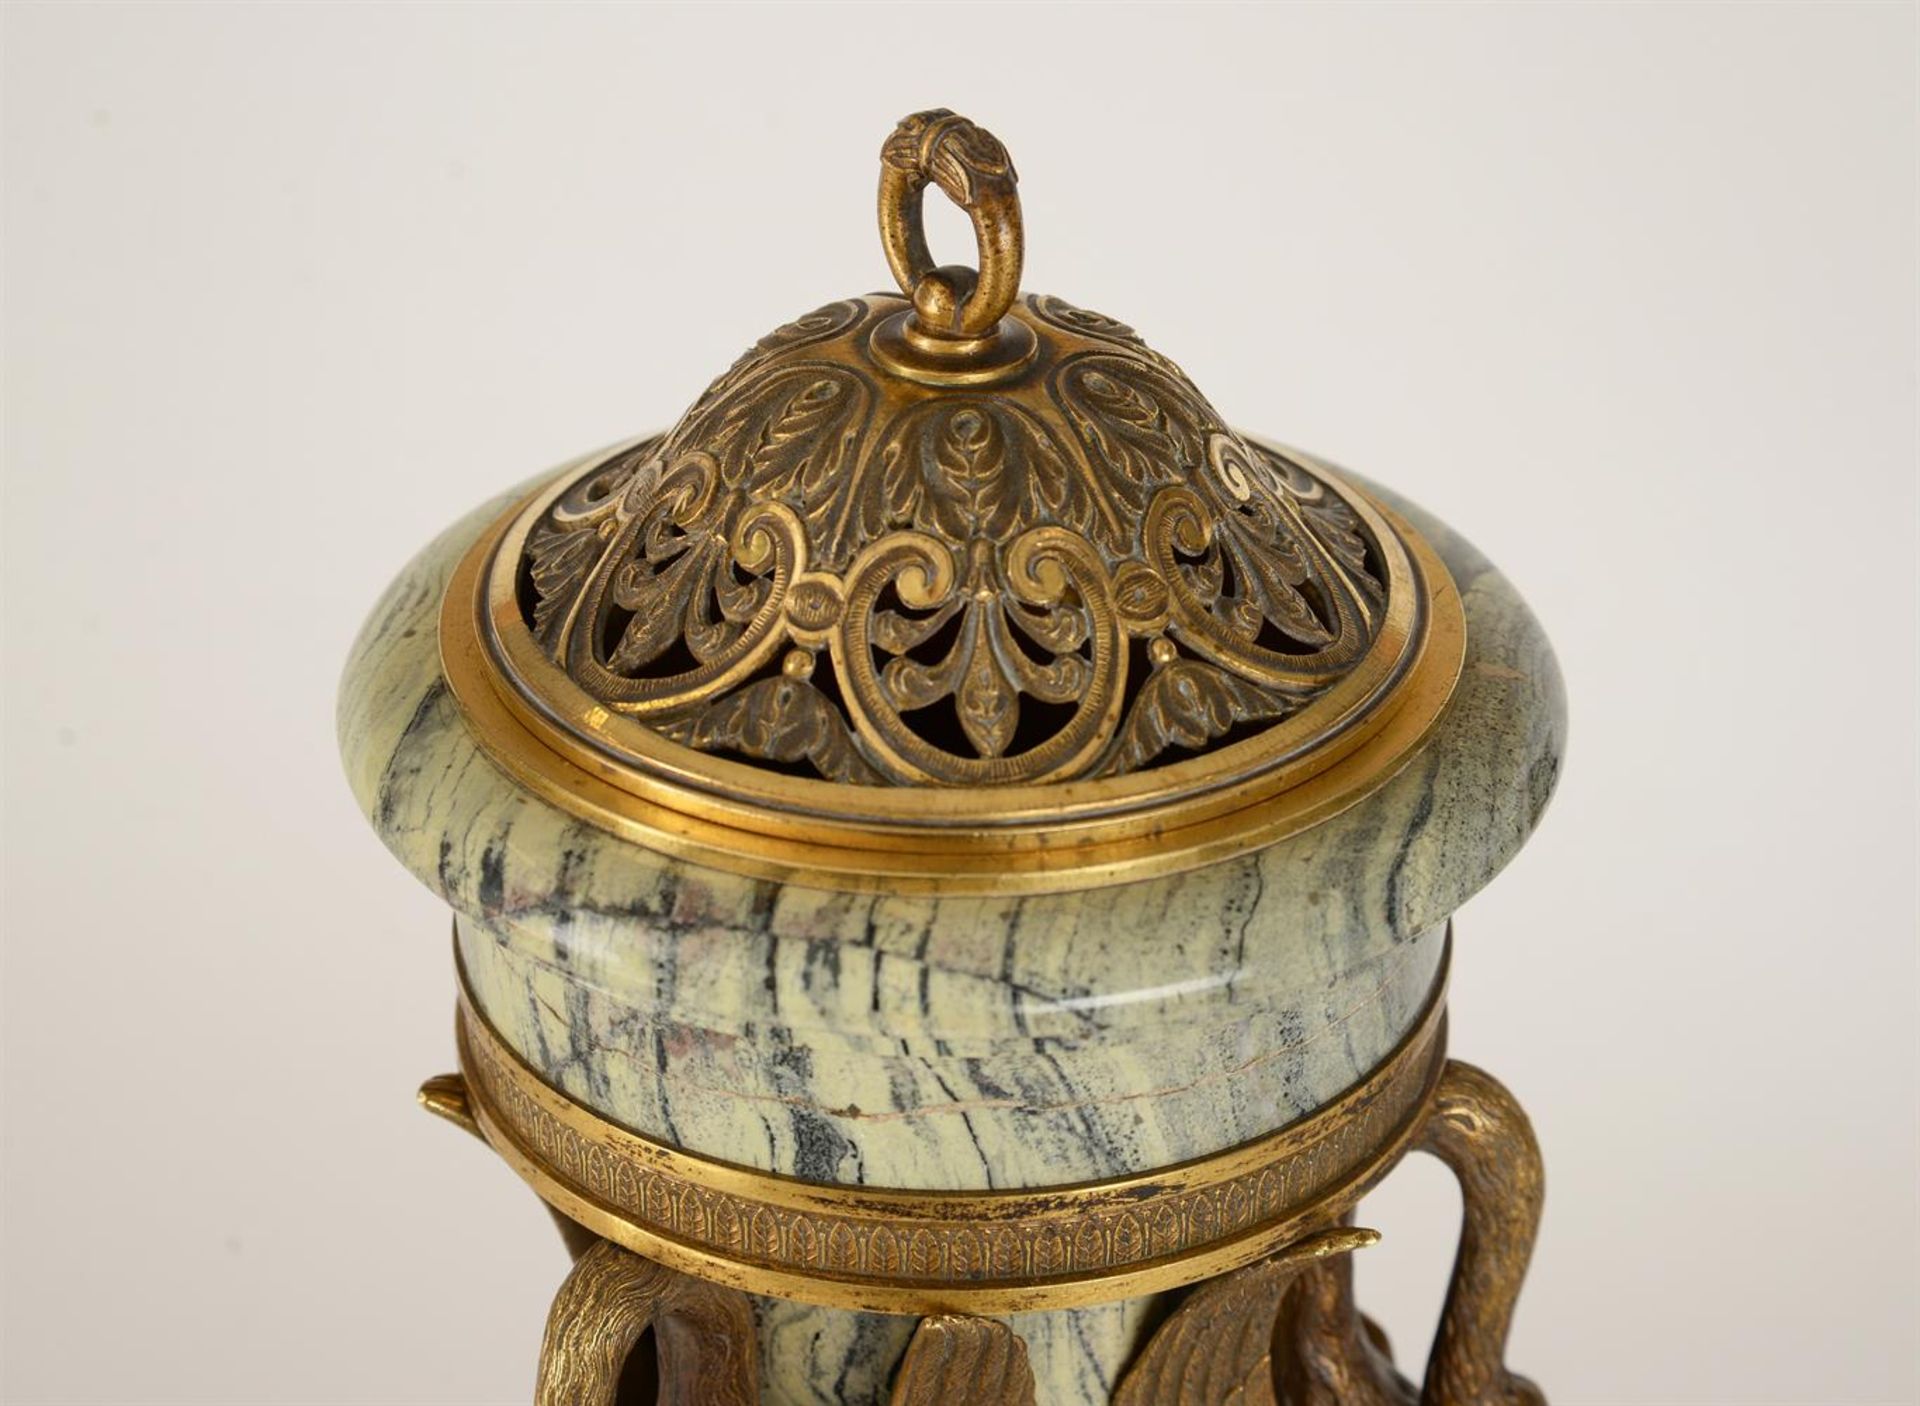 A PAIR OF FRENCH ORMOLU AND CIPOLLINO MARBLE URNS, LATE 19TH CENTURY - Image 3 of 4